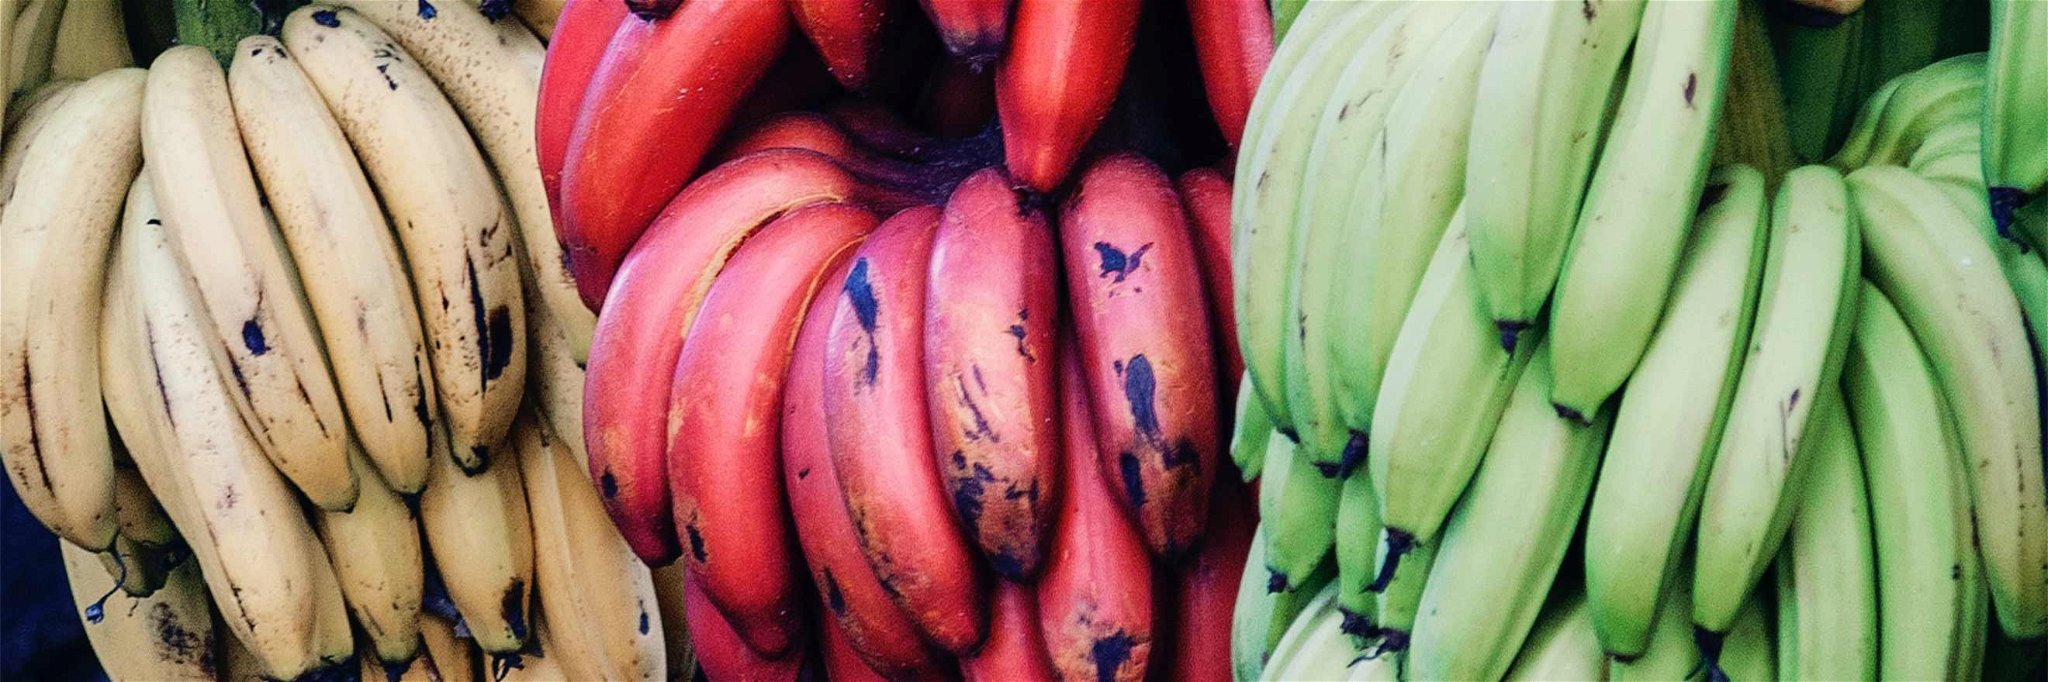 Raw, braised, fried, baked: the red bananas' aromas and flavours can enrich&nbsp;many a dish.